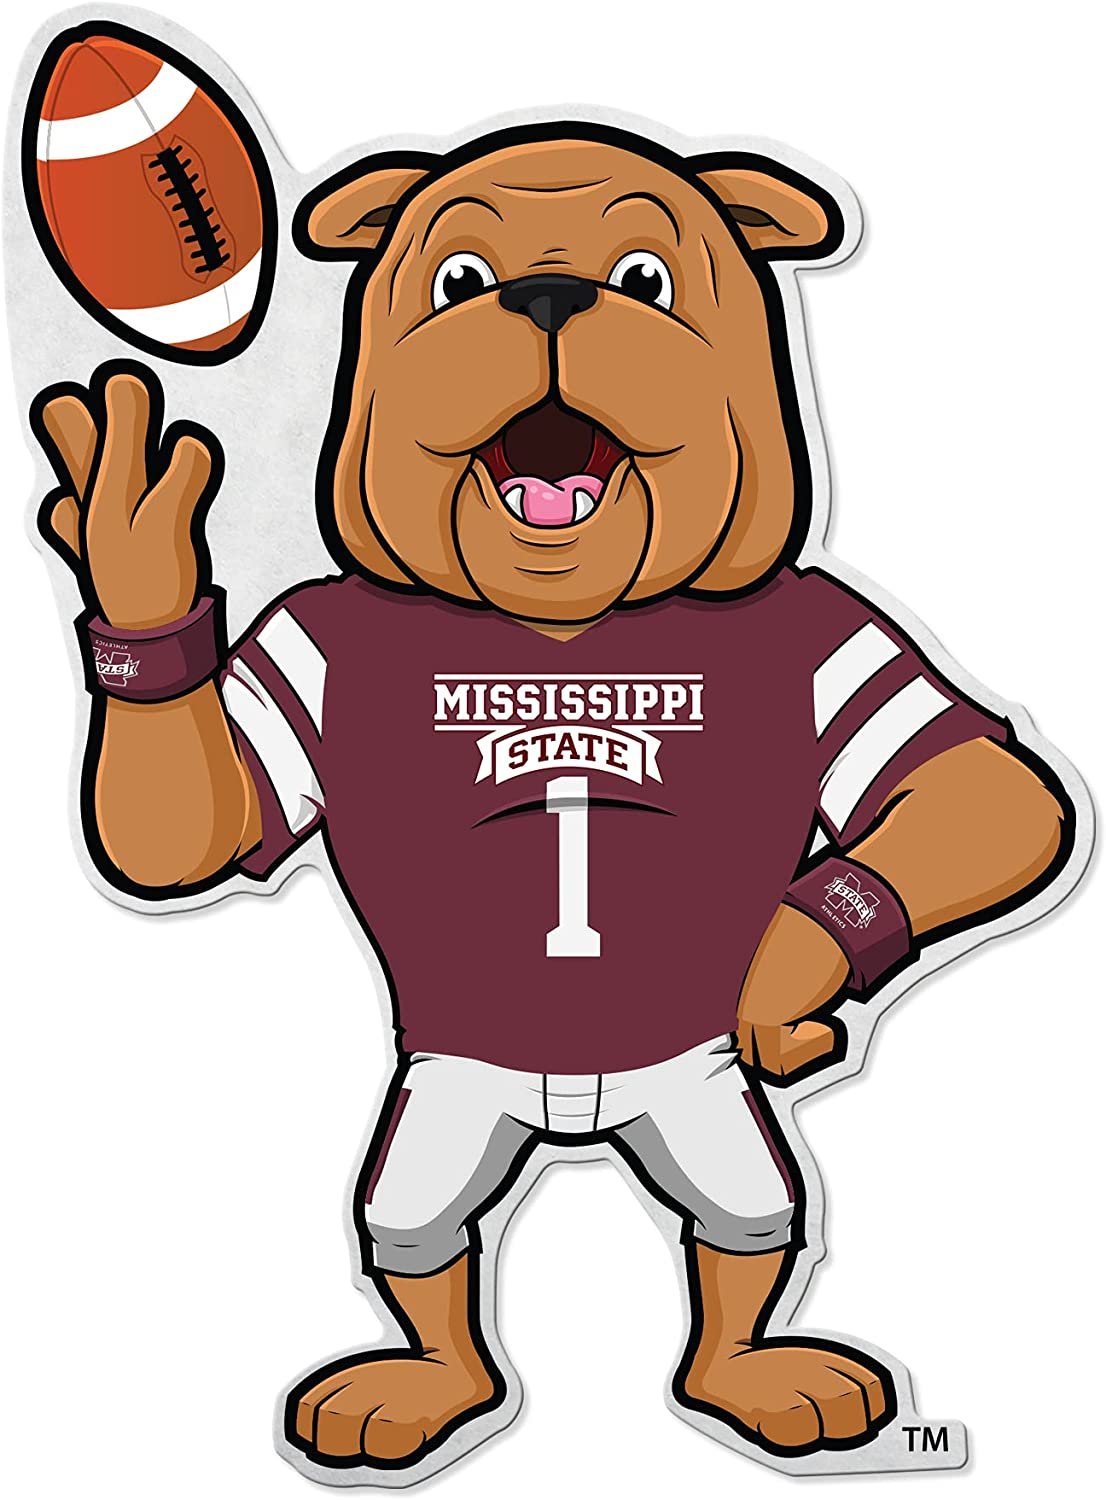 Rico Industries NCAA Mississippi State Bulldogs Shape Cut Mascot Pennant - Home, Living Room, Bedroom, Mancave Decor - Soft Felt Material - Made